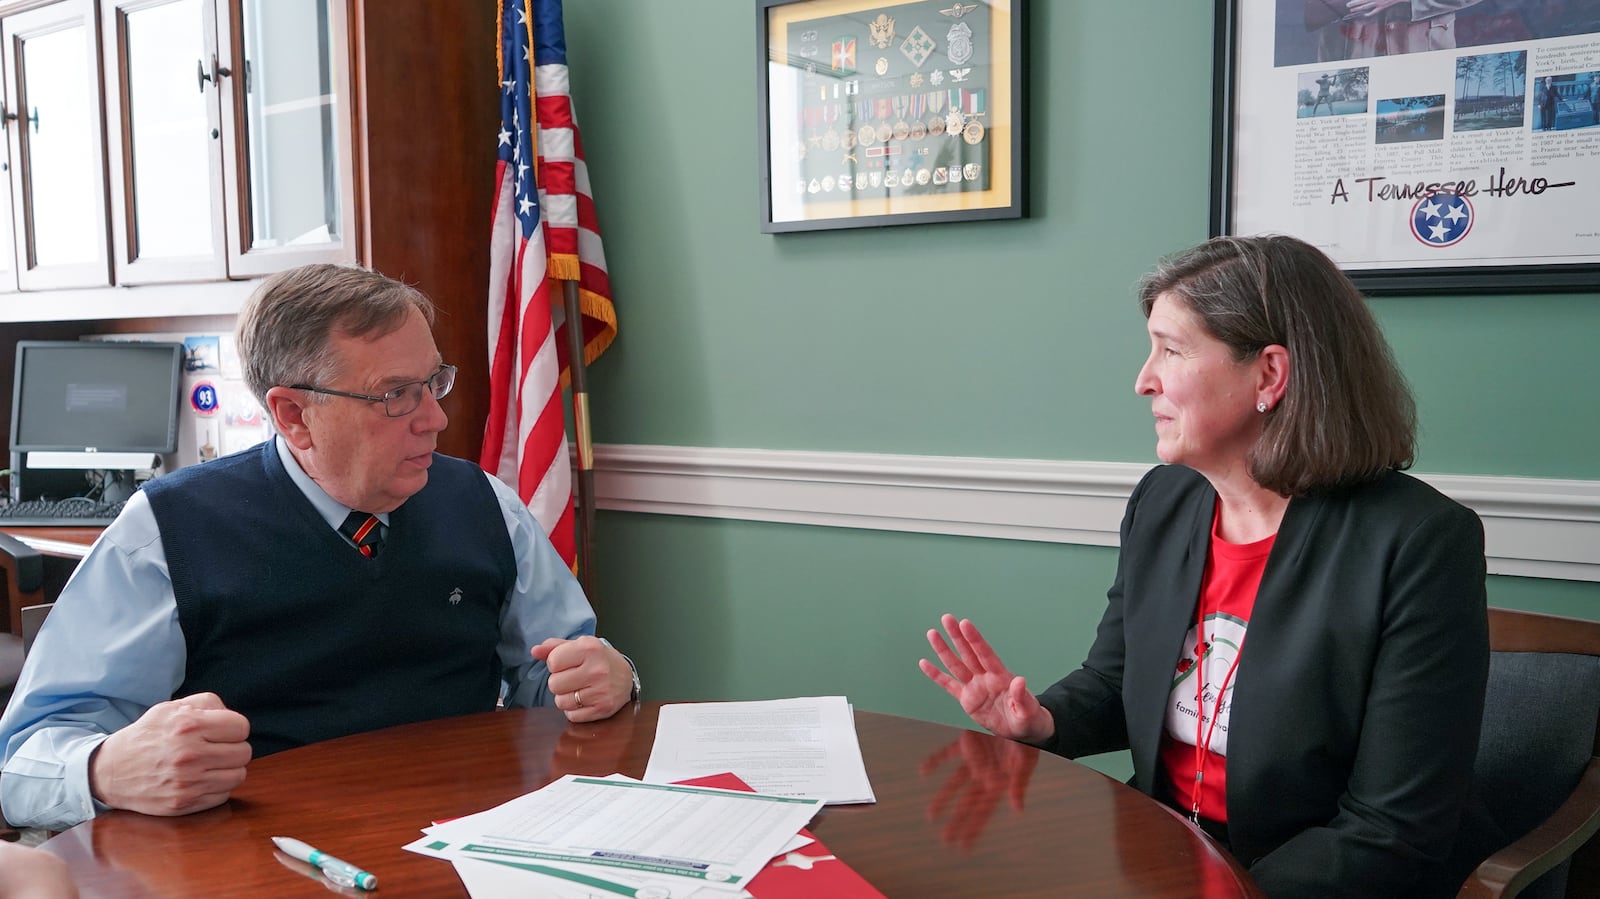  Barb Dentz an advocate with Tennessee Families for Vaccines, met with her state representative, Sam Whitson